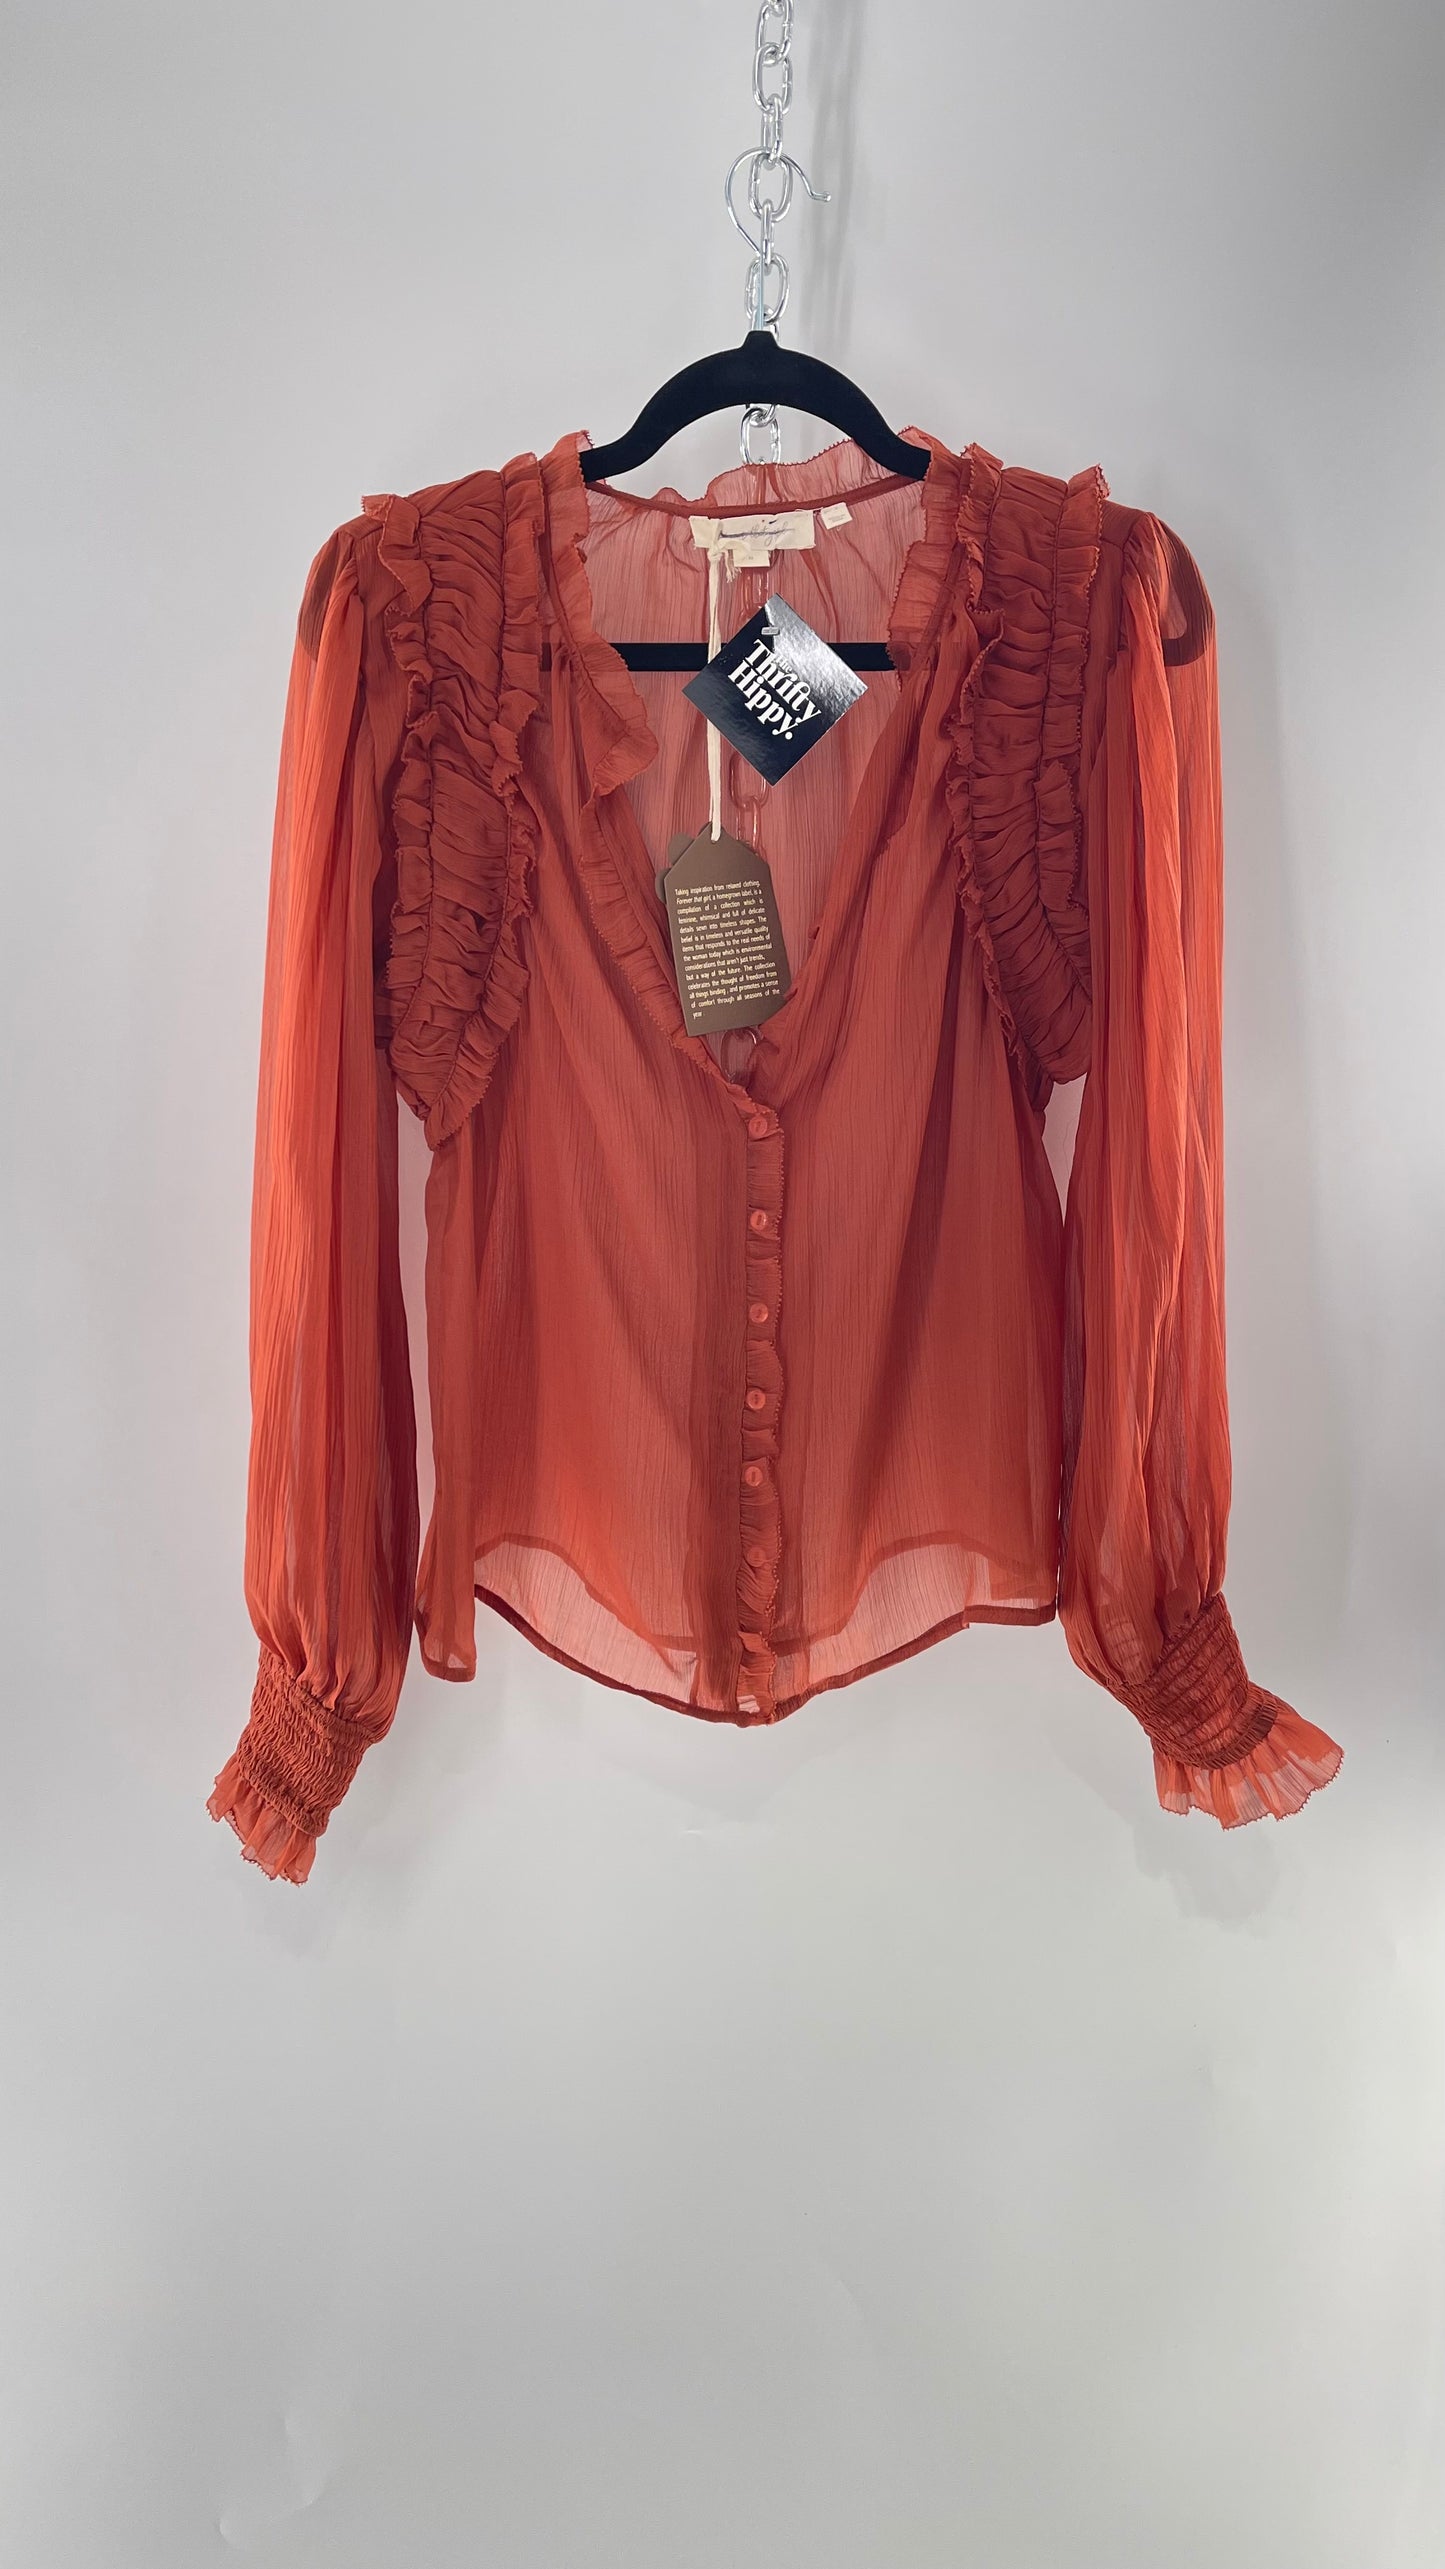 Forever That Girl Burnt Orange Shear Delicate Button Front Top with Pin Tuck Shoulder Detail and Balloon Smocked Sleeve (Medium)